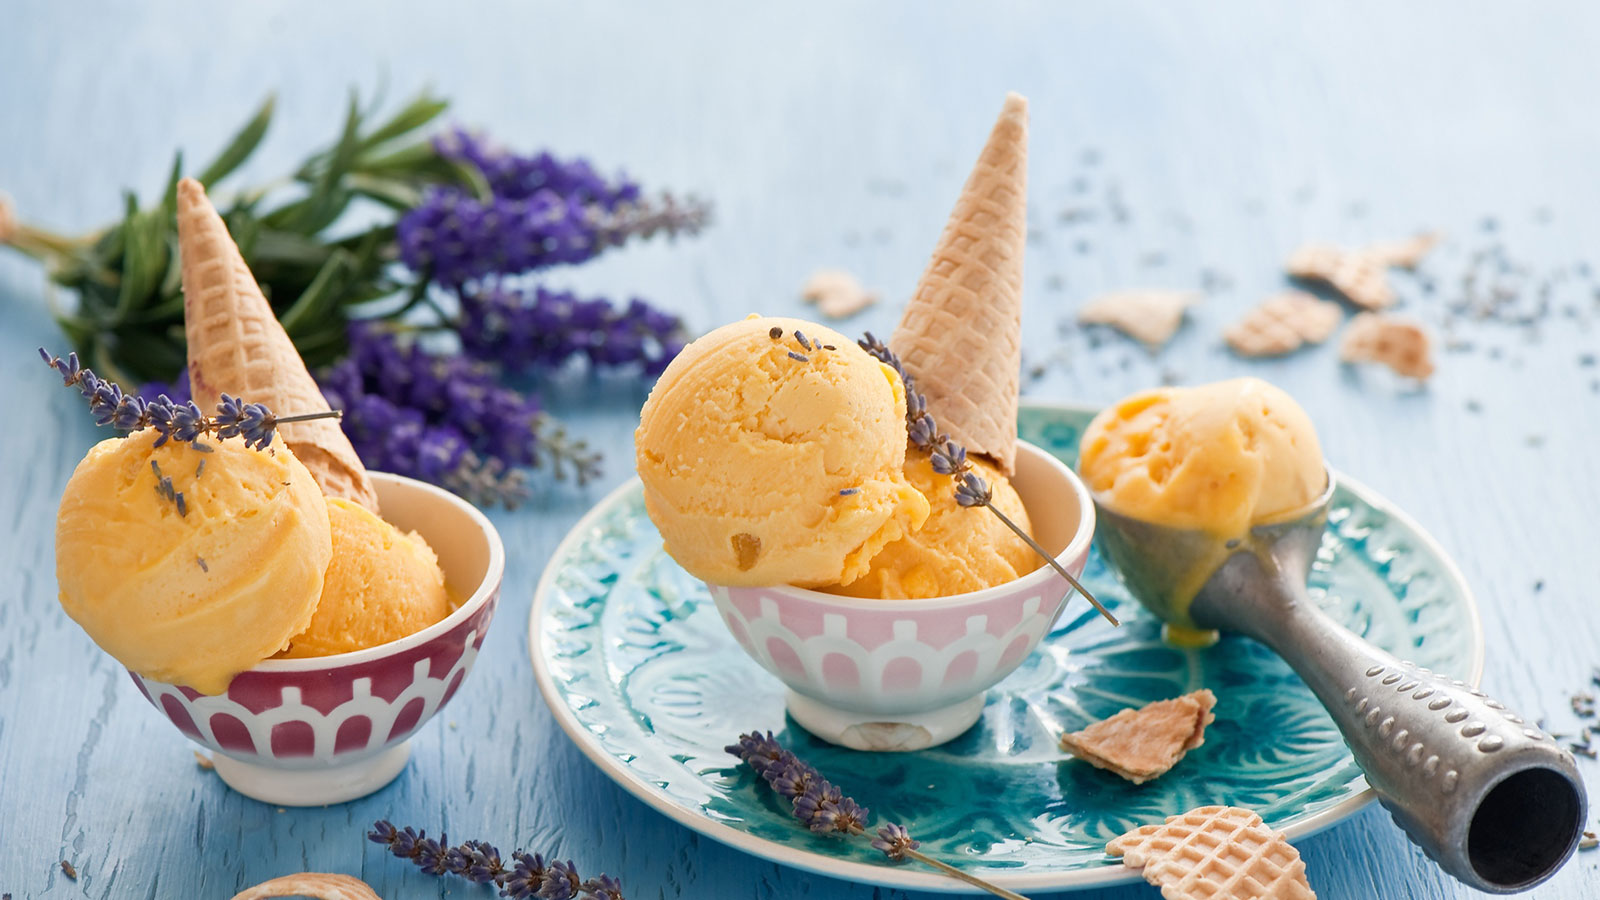 Would You Rather: 🍨 Normal or 🥓 Weird Ice Cream Edition Lavender Ice Cream